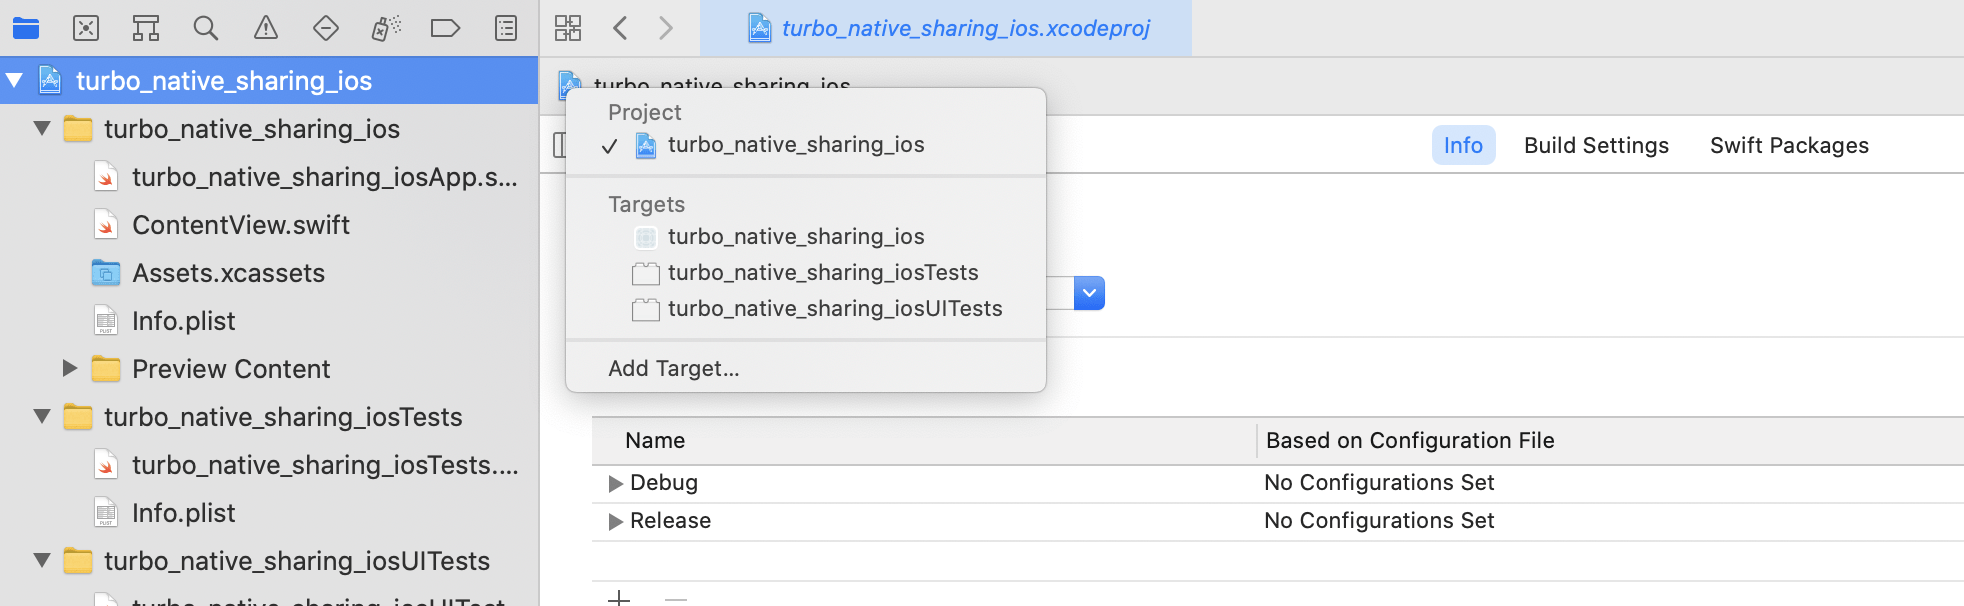 ../assets/images/posts/2021/2021-02-18-turbo-native-ios-03-project-settings.png